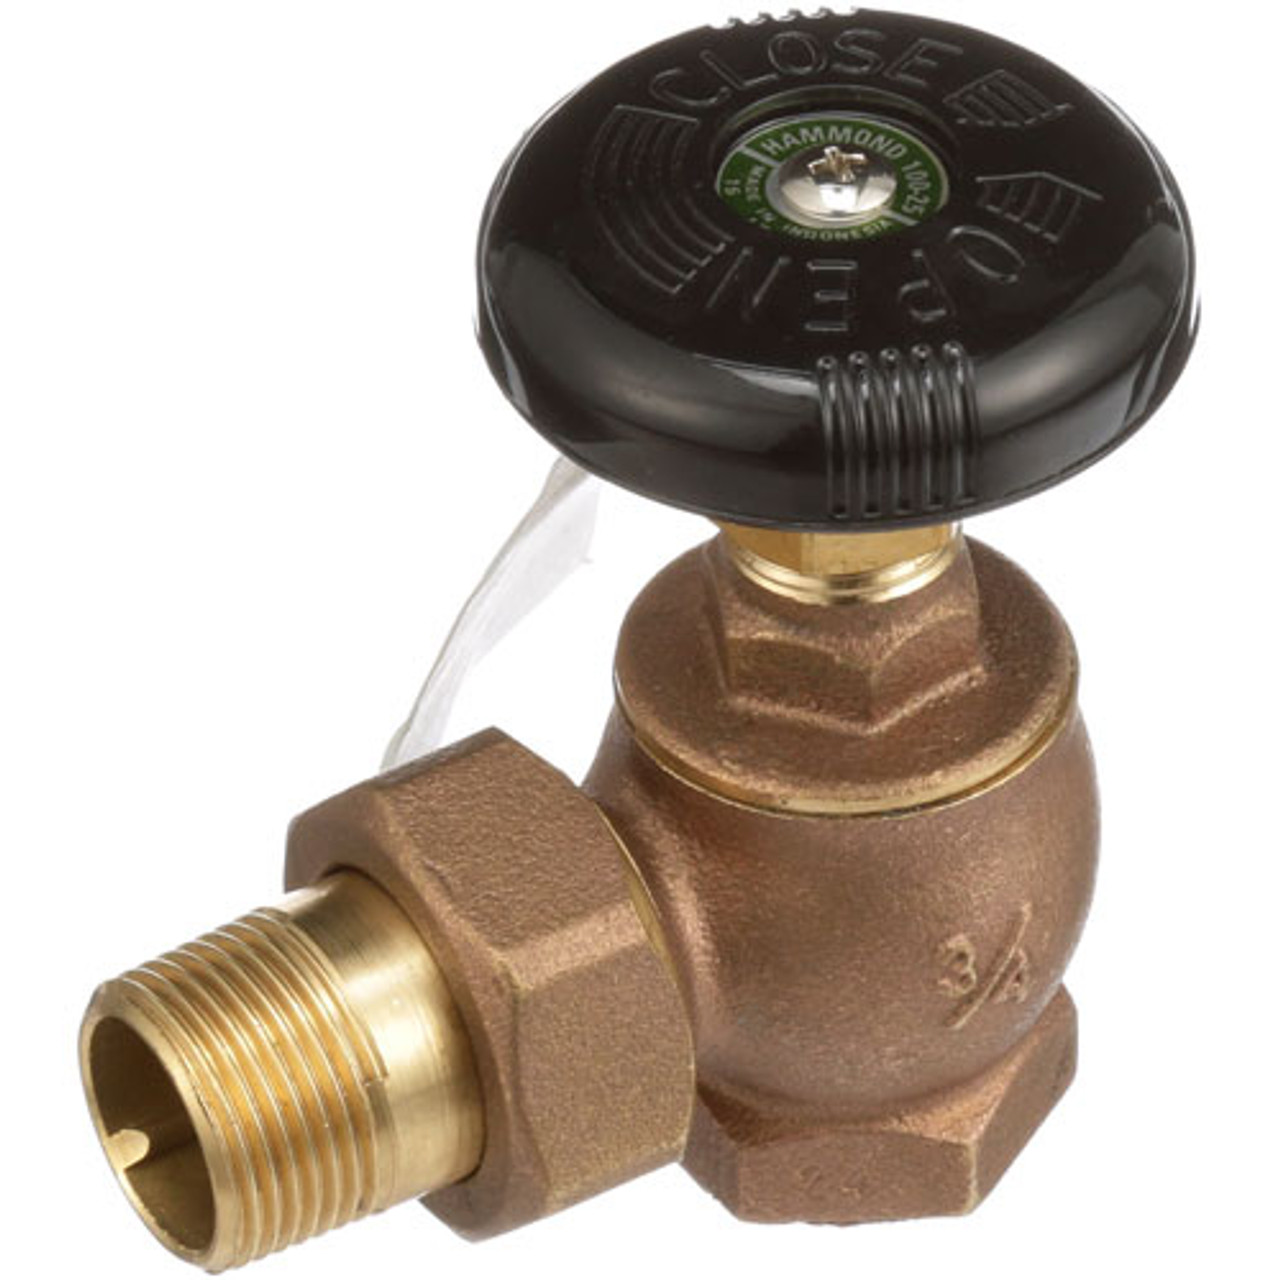 Angle Valve 3/4" - Replacement Part For Hobart 00-881984